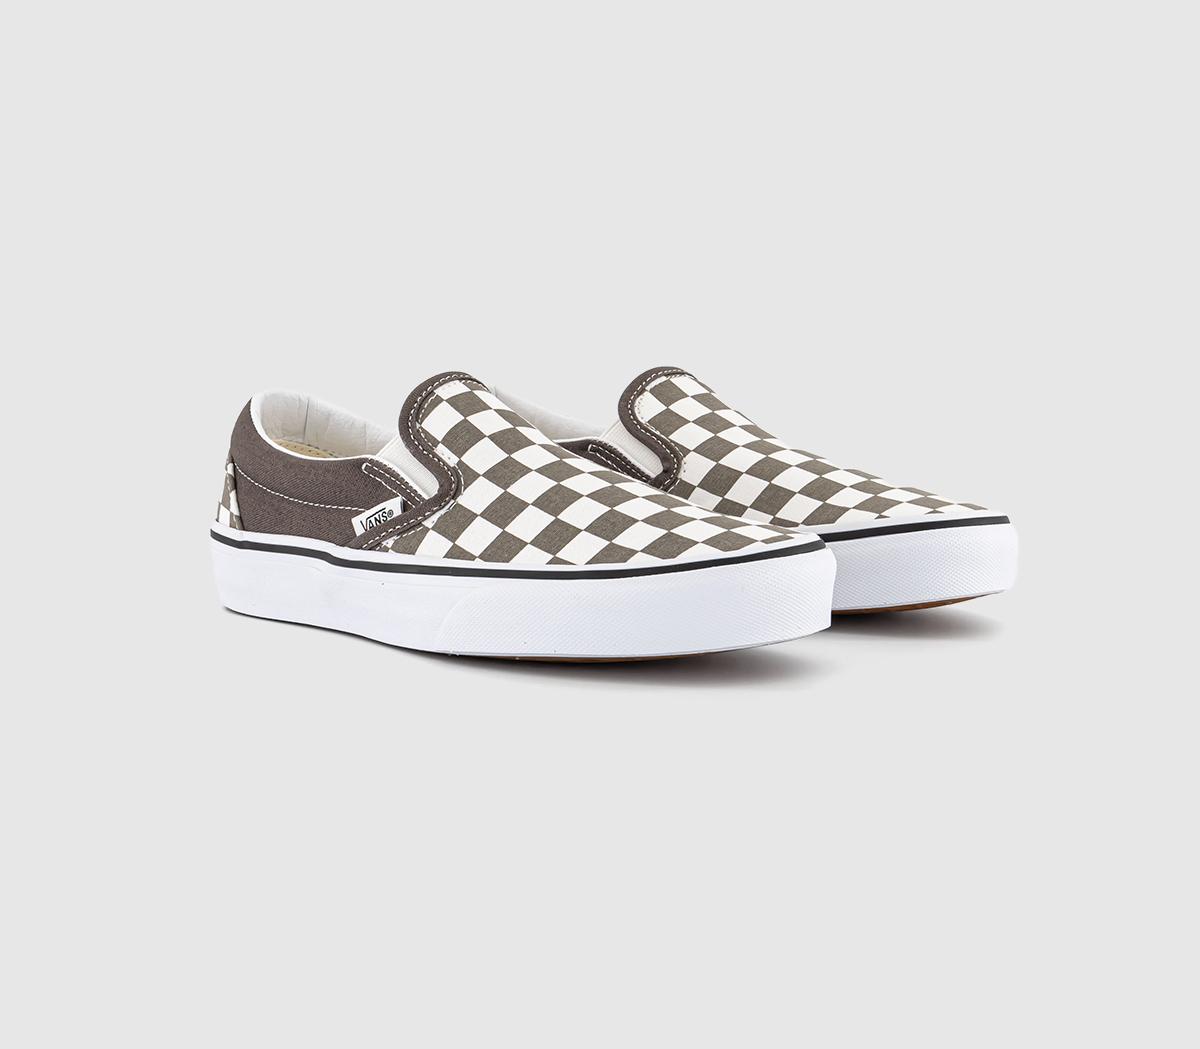 Vans Classic Slip On Trainers Color Theory Checkerboard Bungee Cord Brown/White, 9